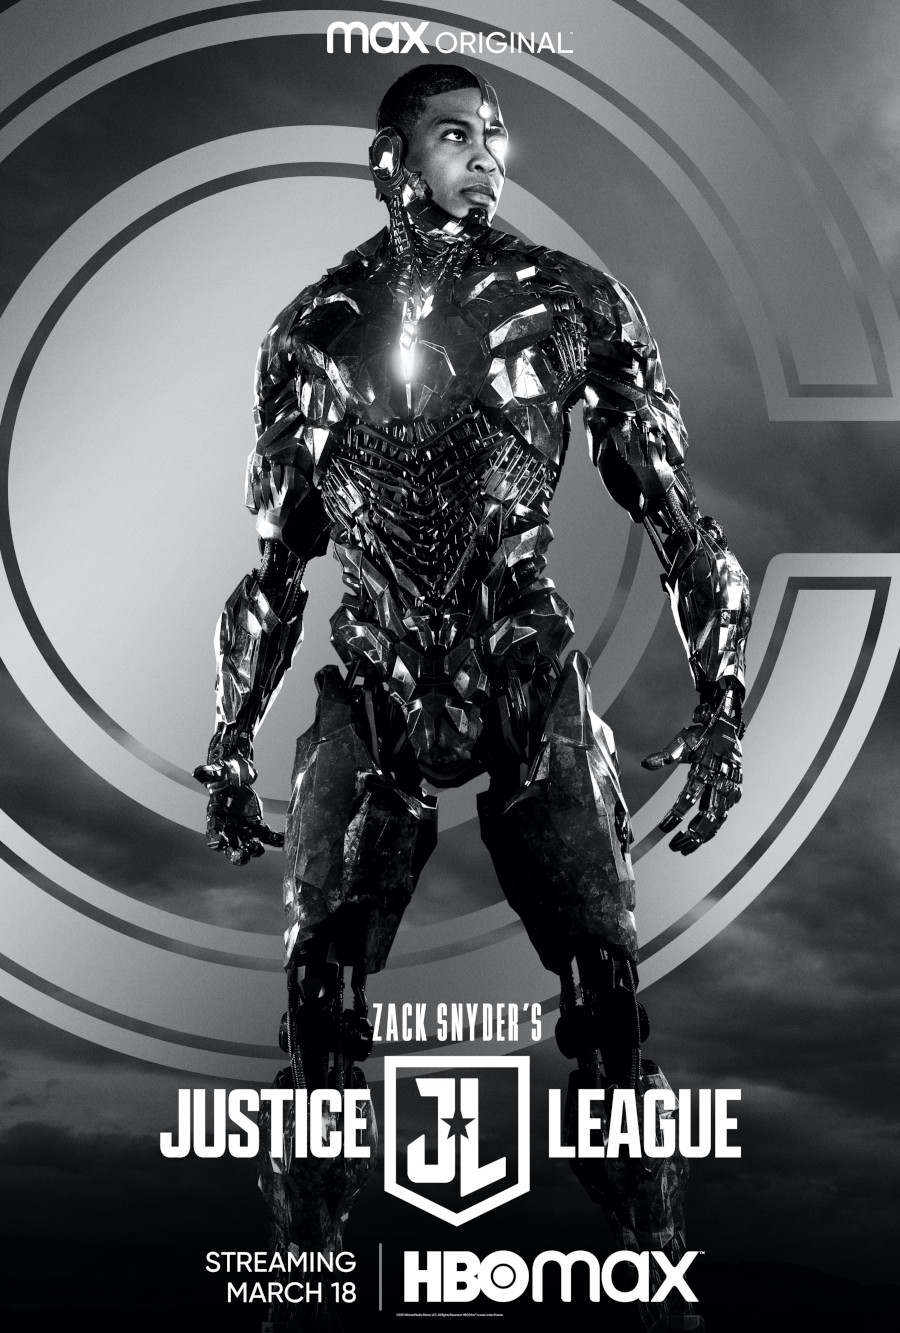 Ray Fisher Cyborg poster Zack Snyder's Justice League